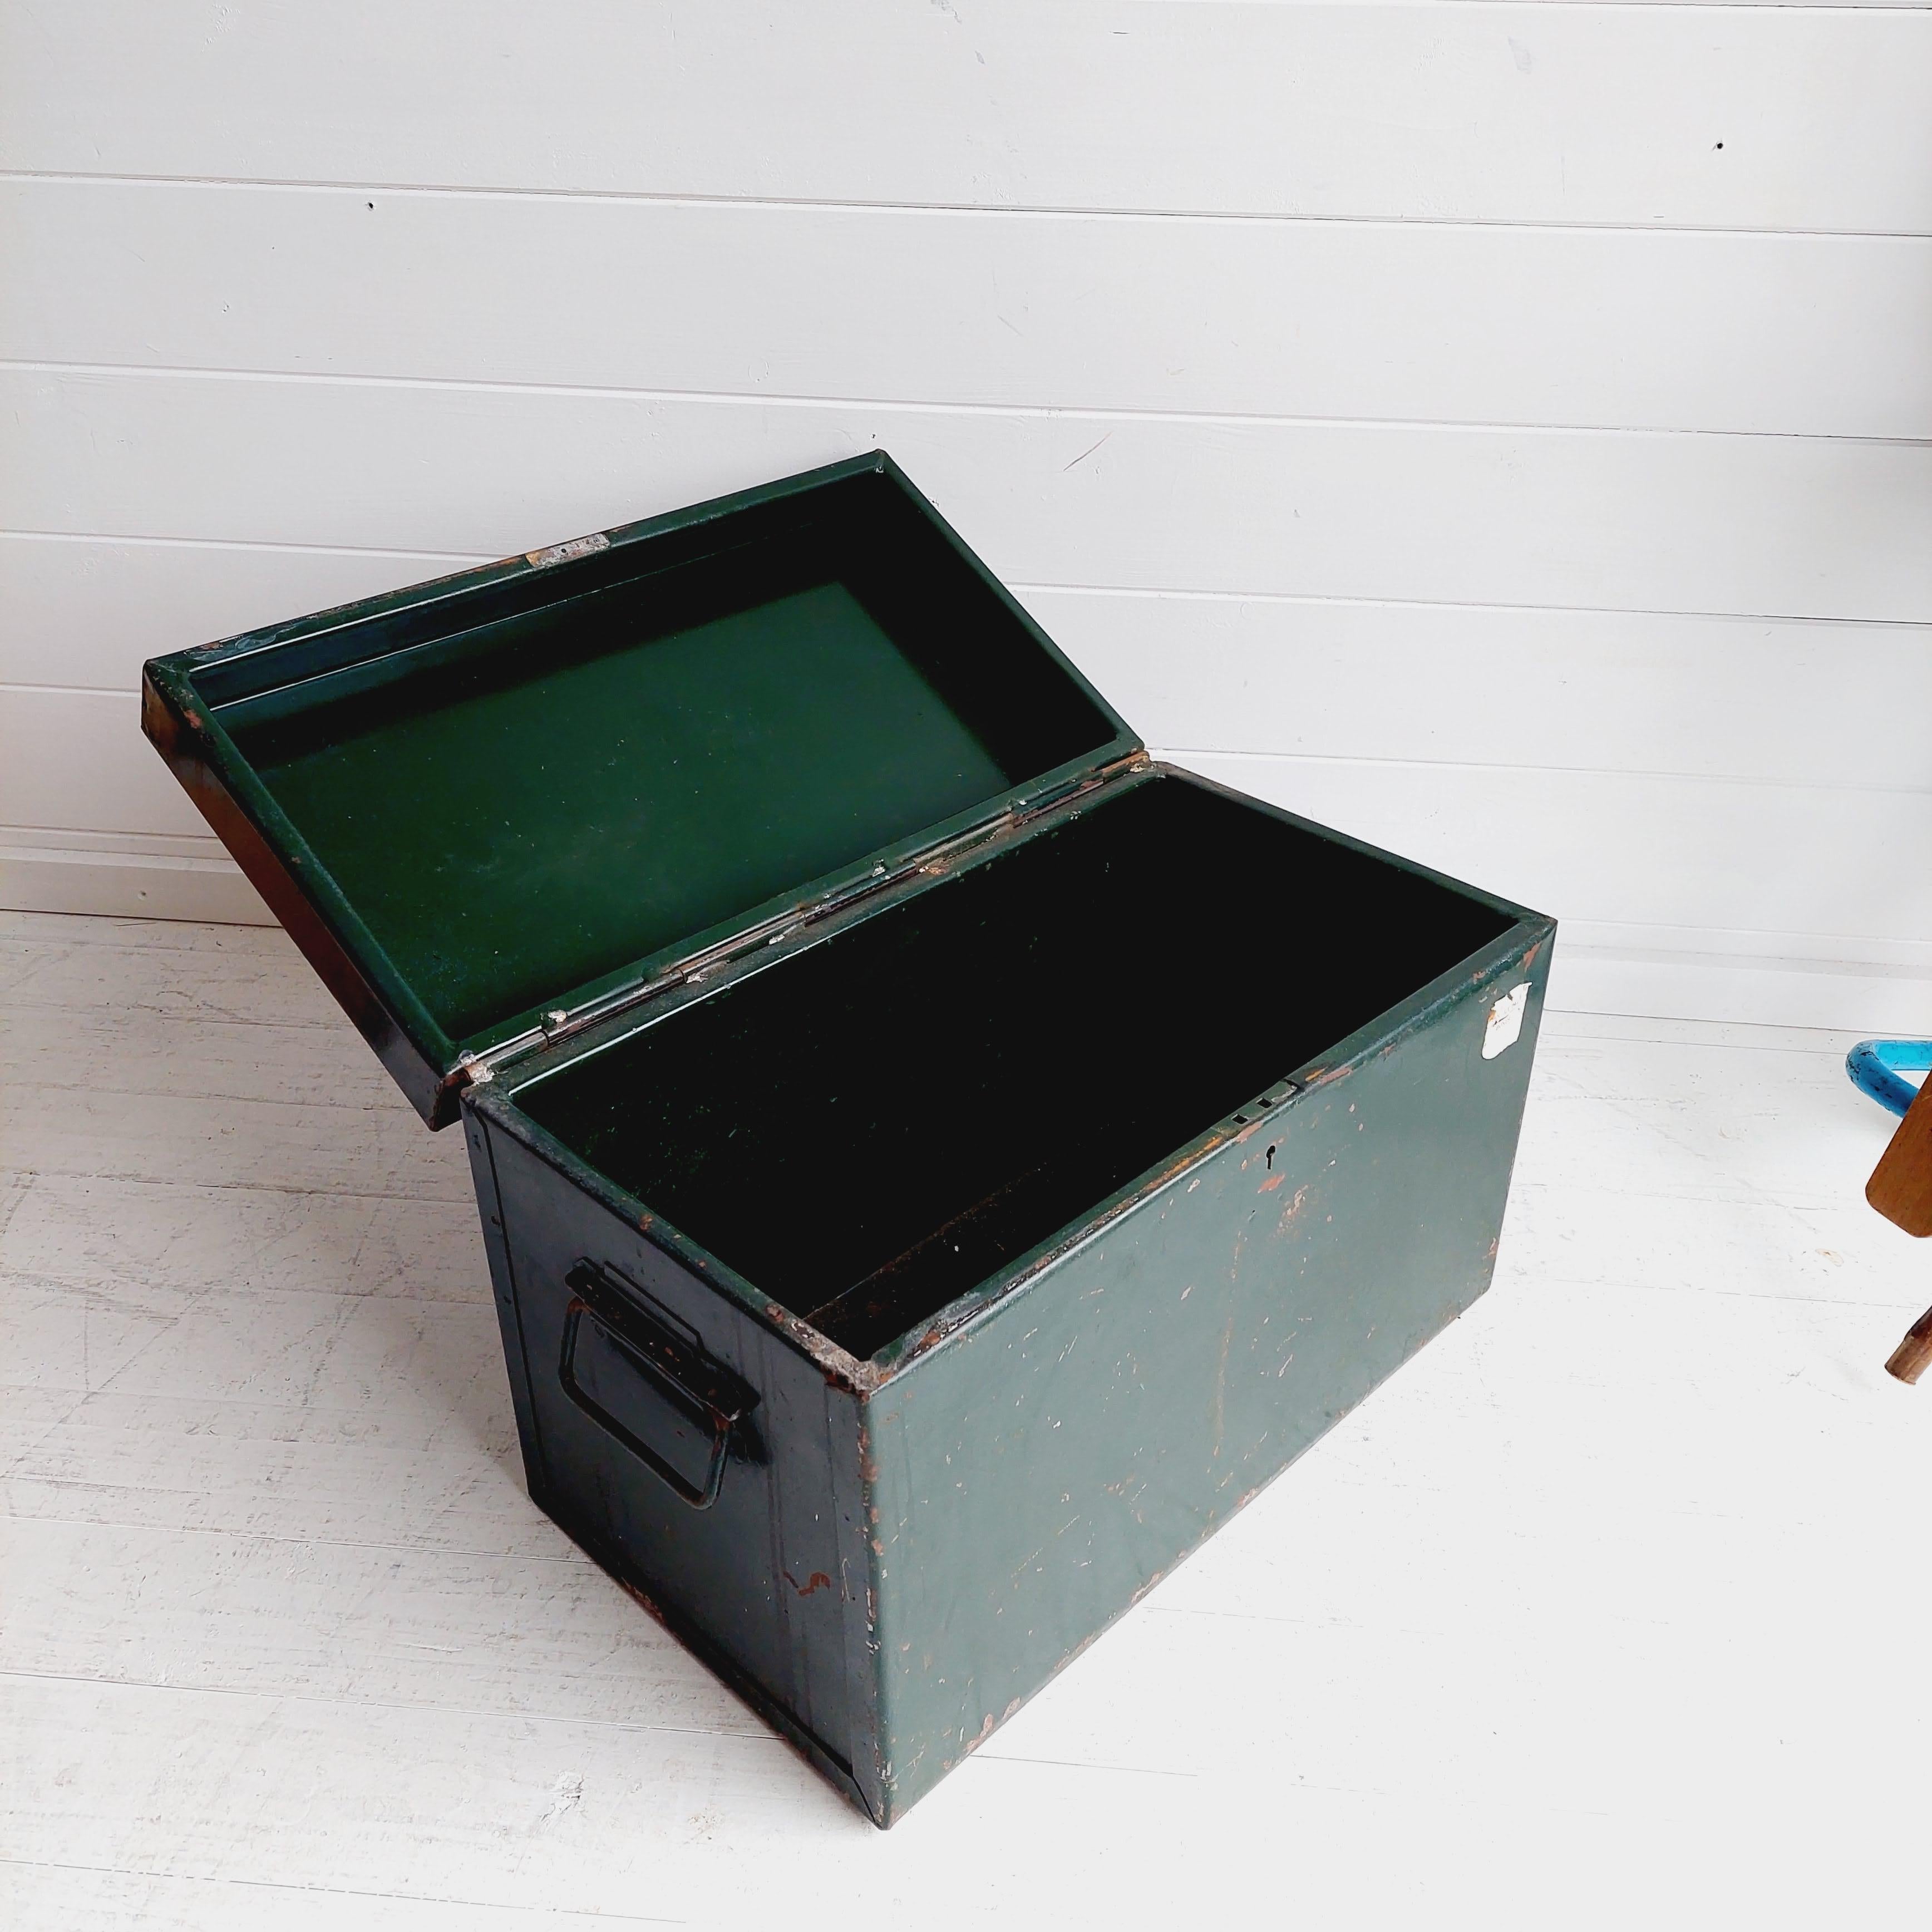 1950s Industrial box travel trunk.

Military green style
Made of green painted metal.
It has a top and sides handles.
A piece with lovely patina perfect to add character to any room.

An excellent addition to any room, as a decor for your